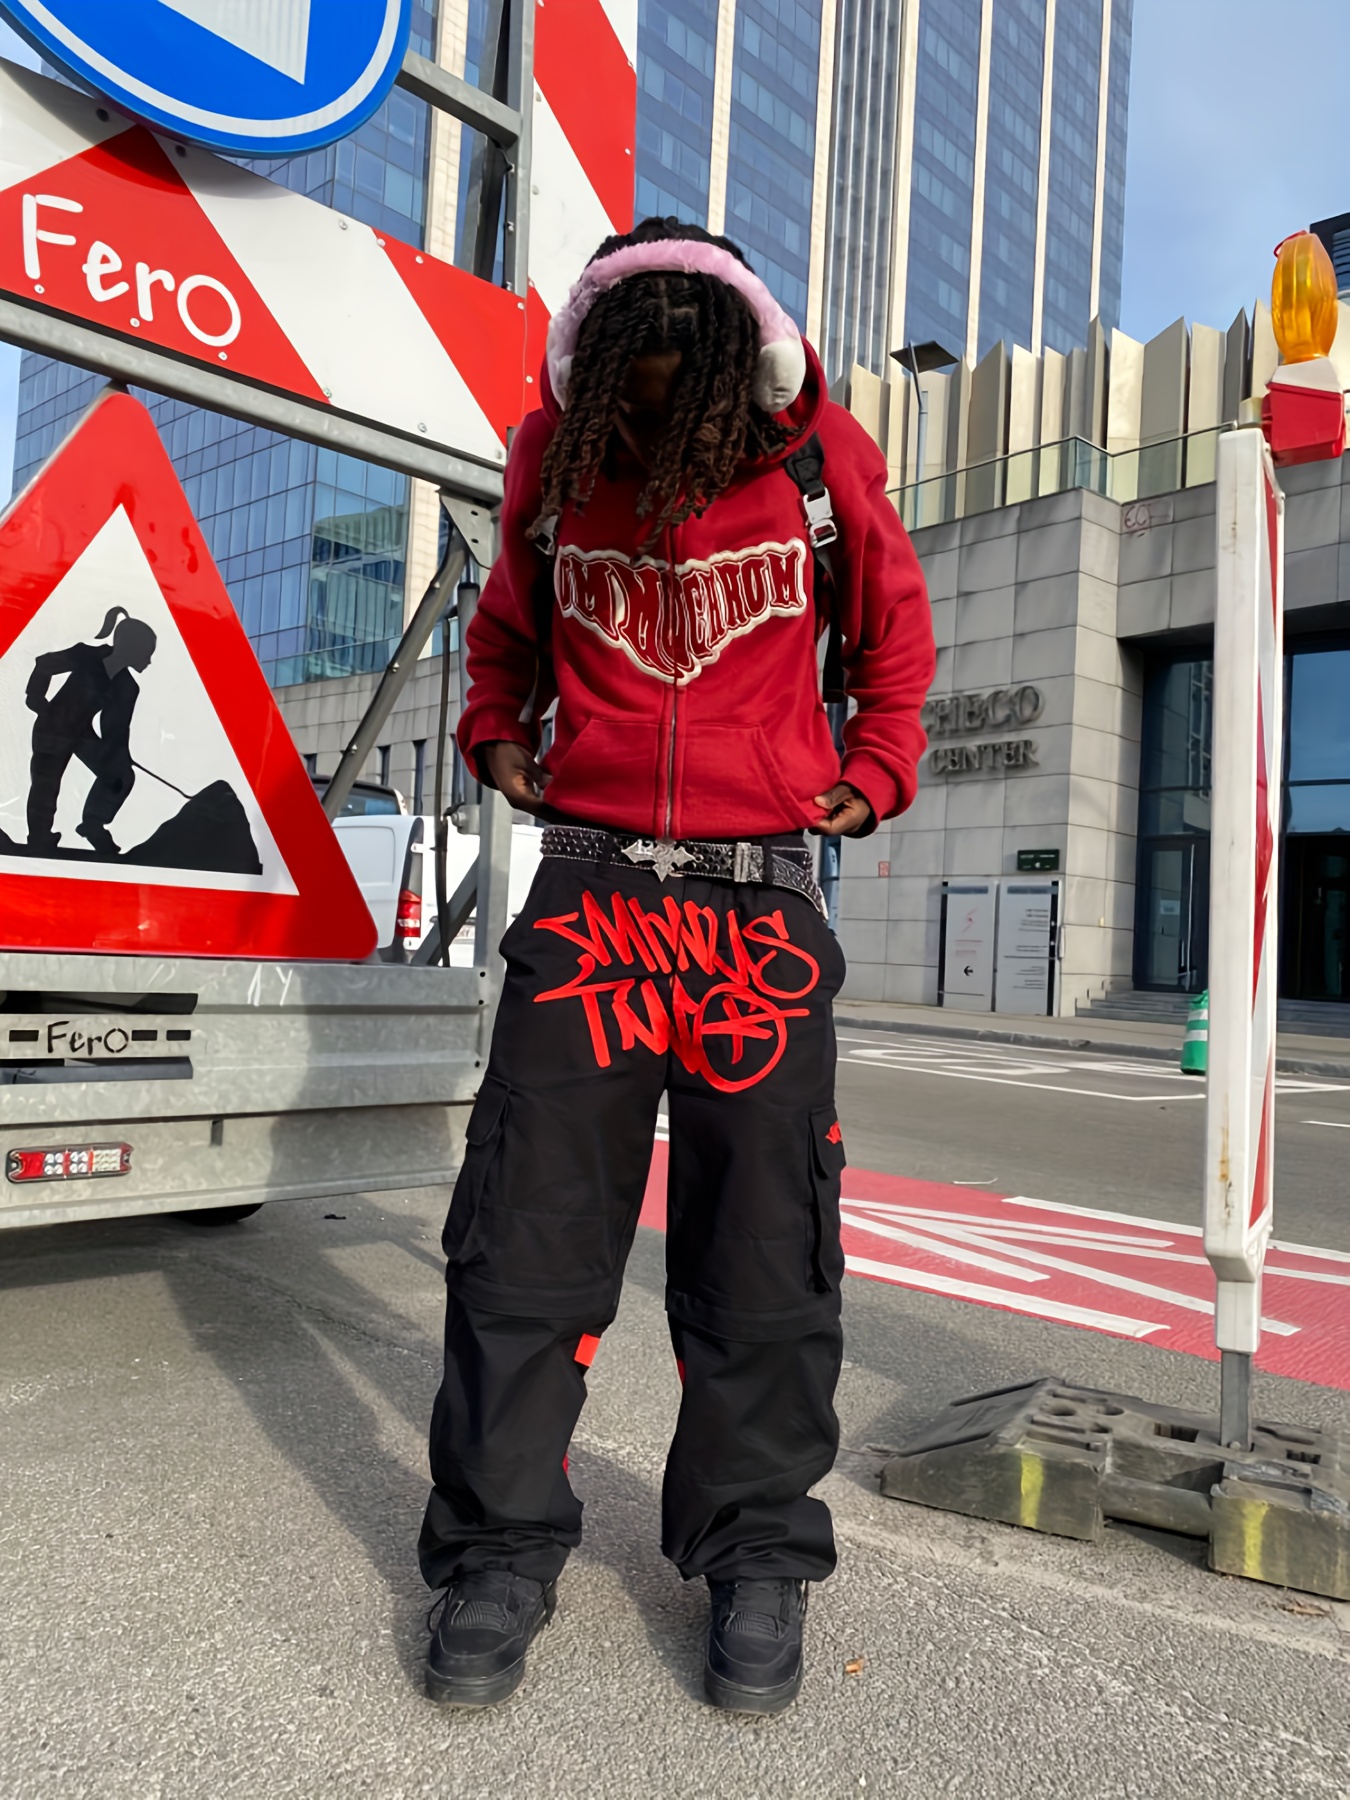 Cargo Trousers for Men, Minus-Two Cargos Pants, Y2k Jeans, 90s  Adjustable Mens Printed Hip Hop Street Costumes